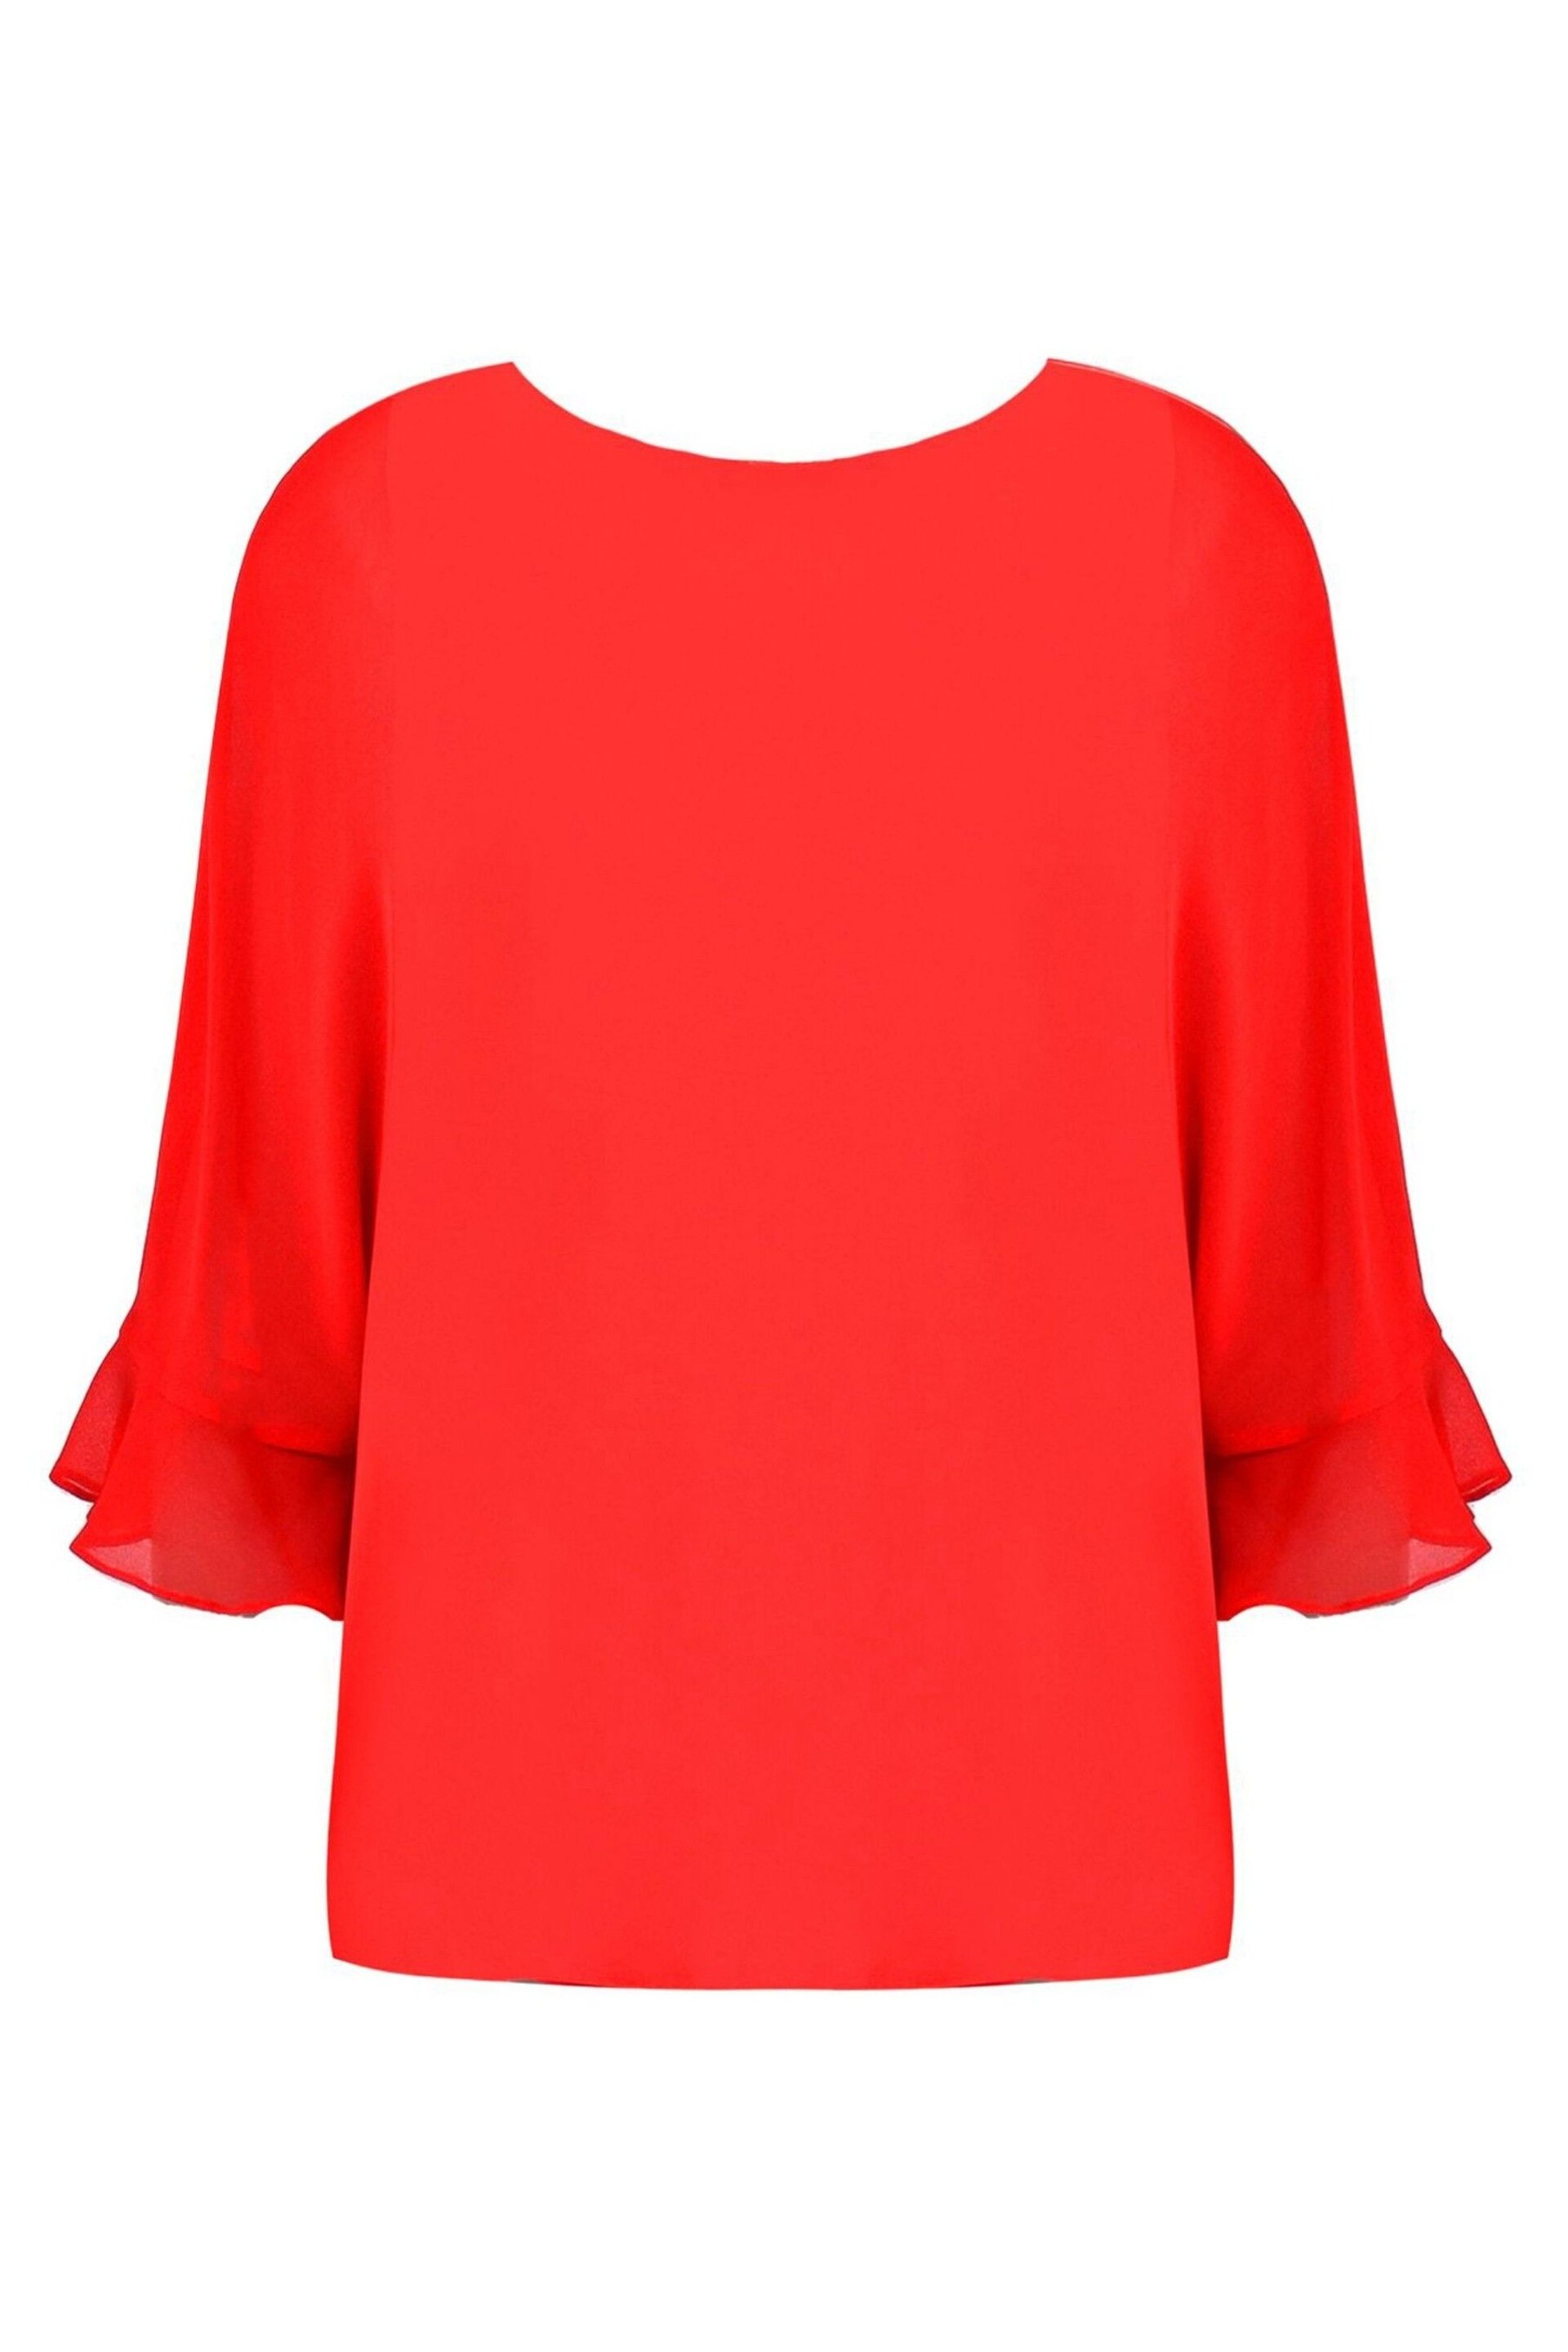 Live Unlimited Red Flute Sleeve Overlay Top - Image 4 of 4